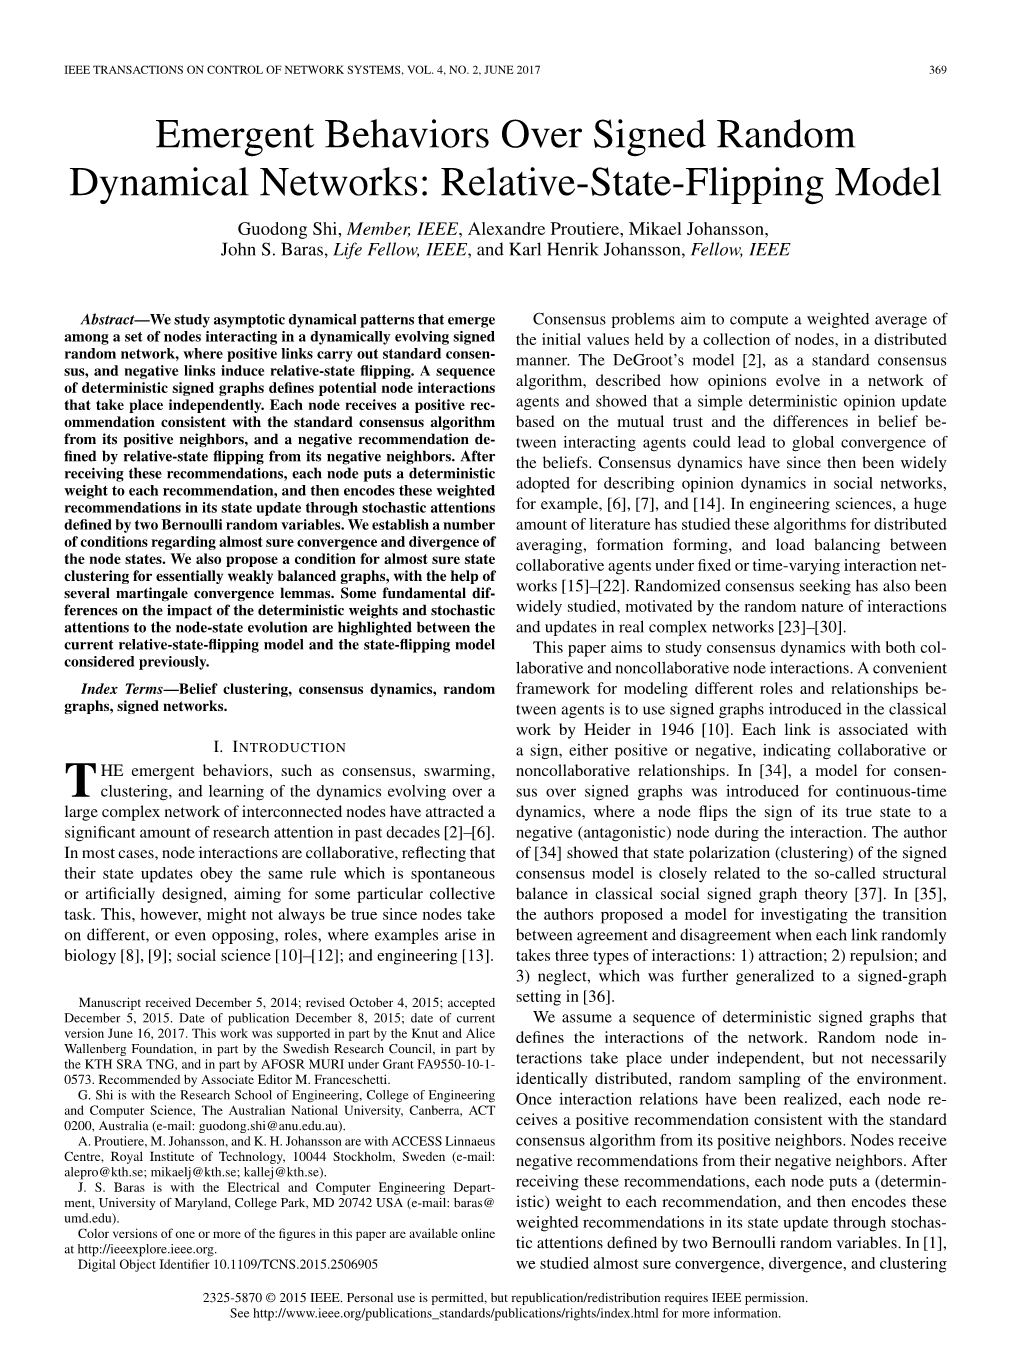 Emergent Behaviors Over Signed Random Dynamical Networks: Relative-State-Flipping Model Guodong Shi, Member, IEEE, Alexandre Proutiere, Mikael Johansson, John S